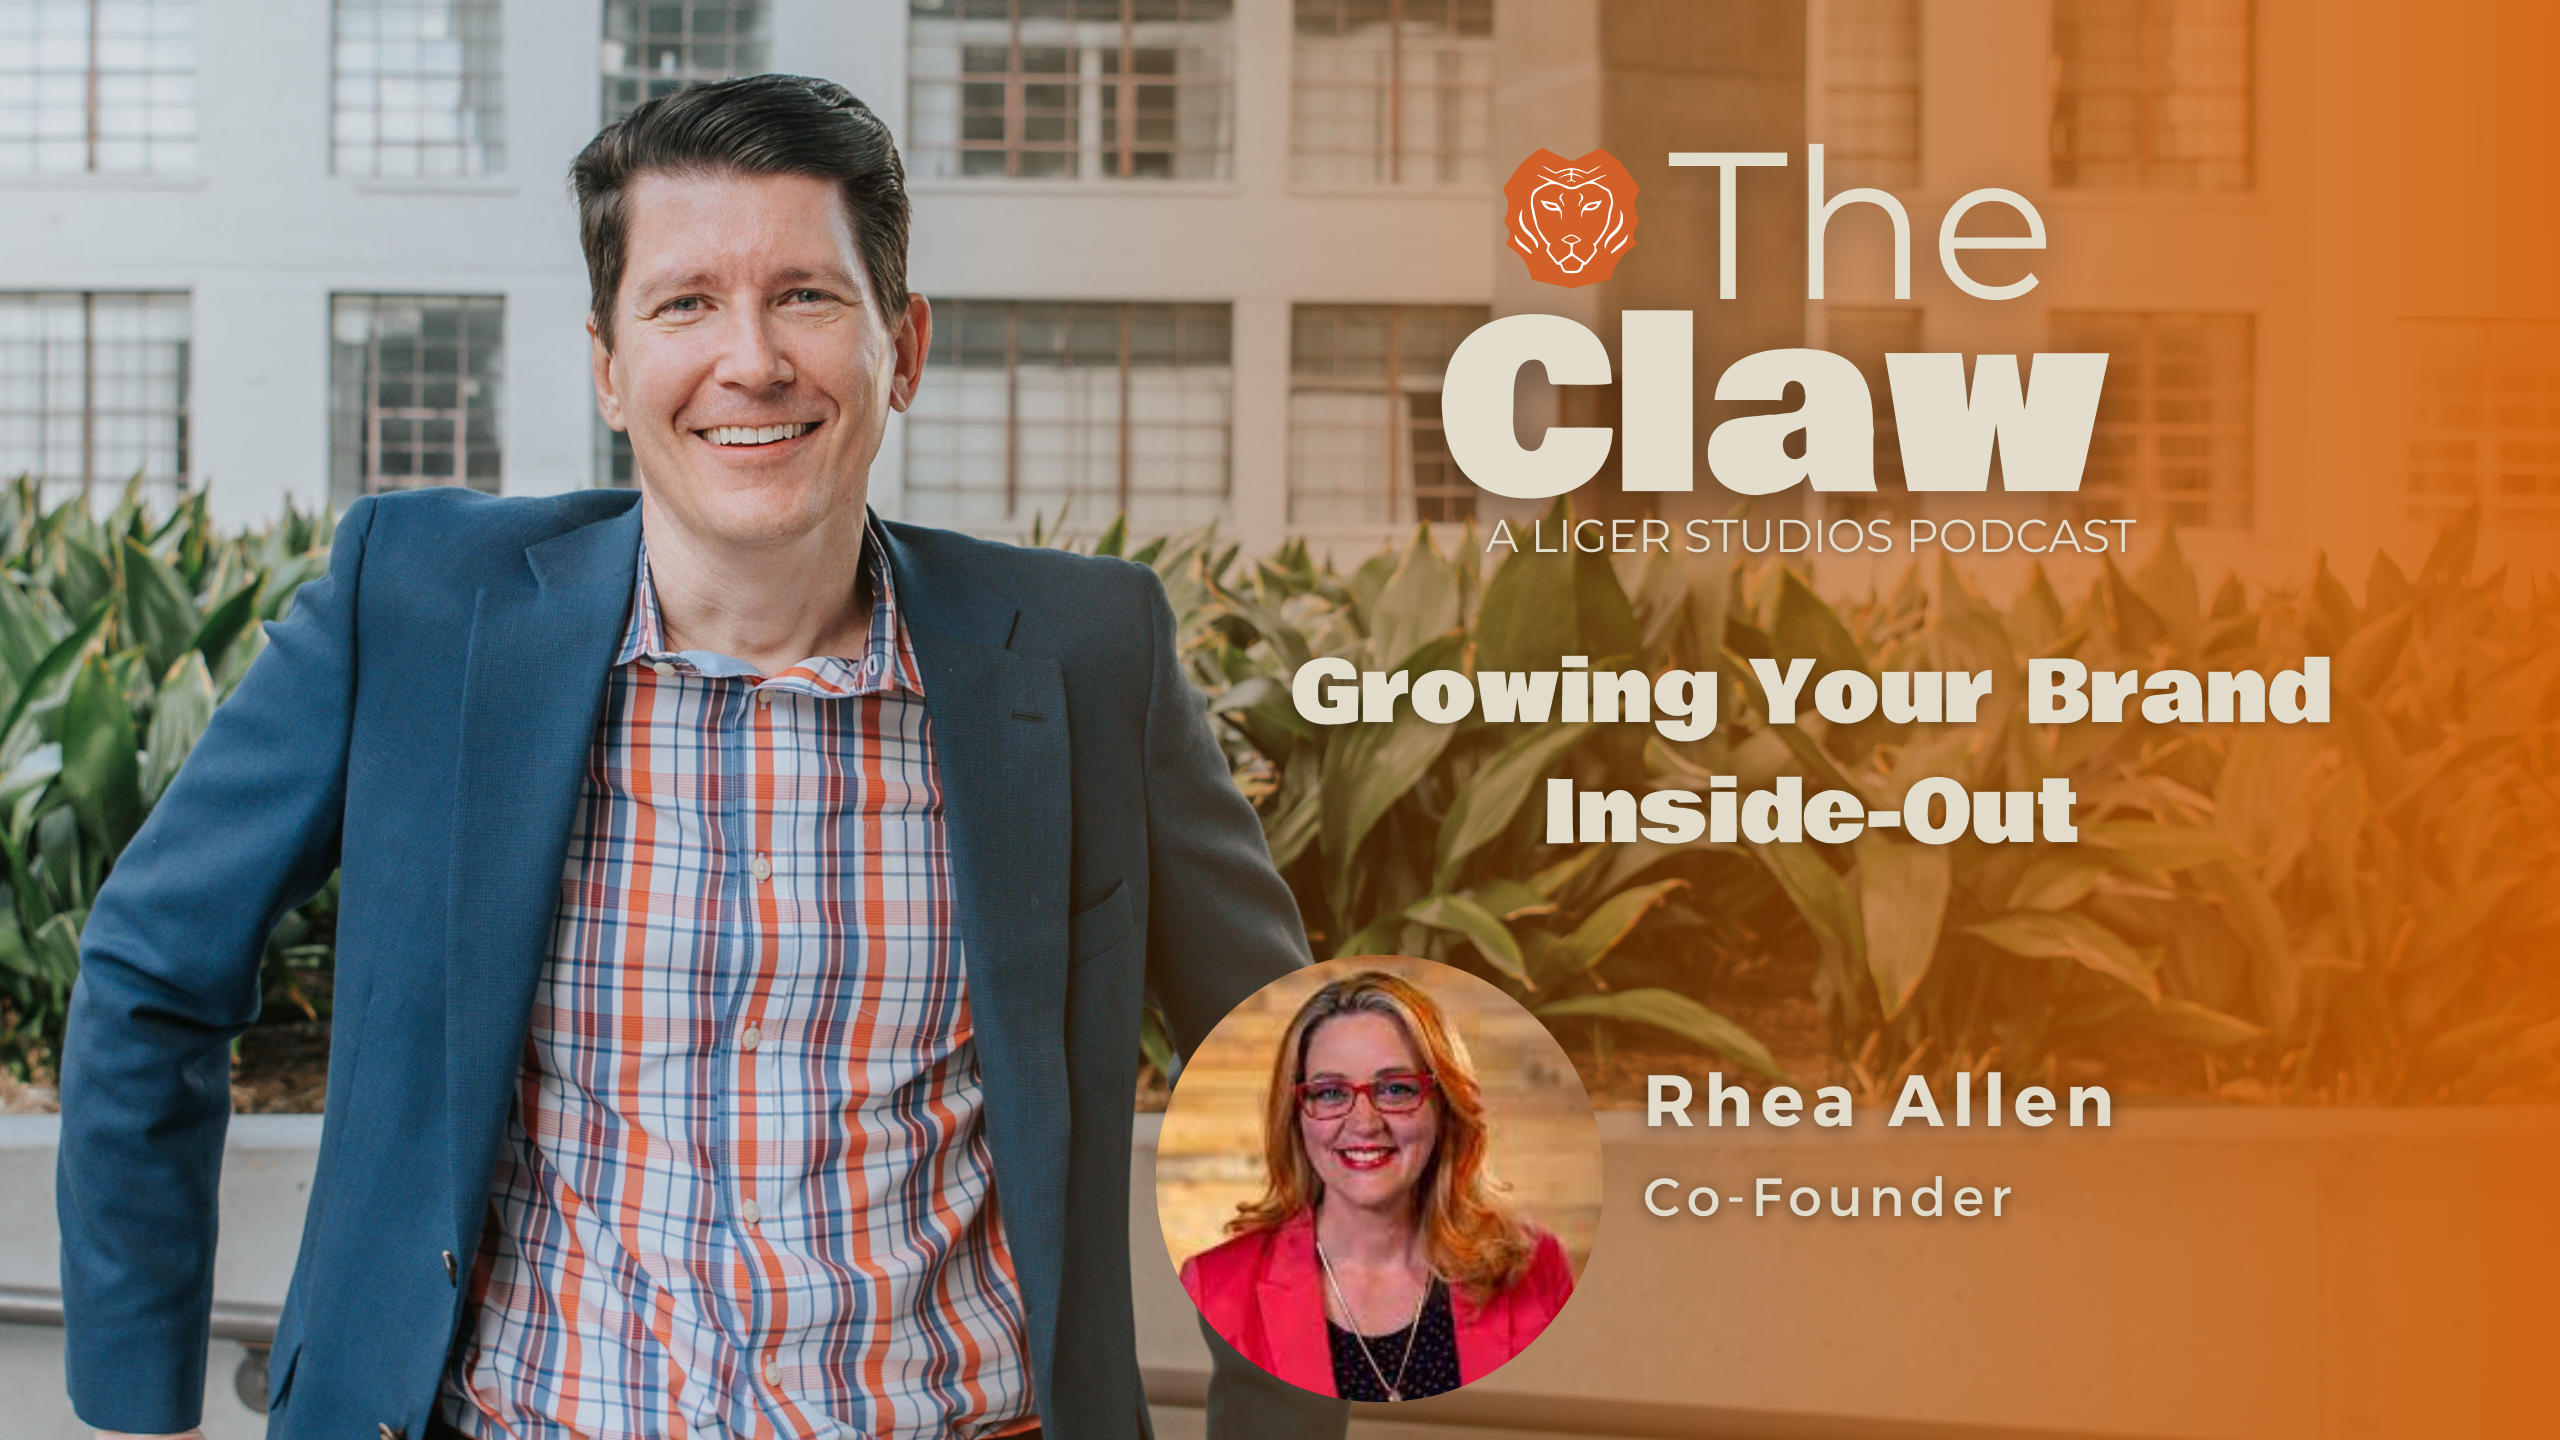 The Claw Podcast: Growing Your Brand Inside-Out (with Rhea Allen)